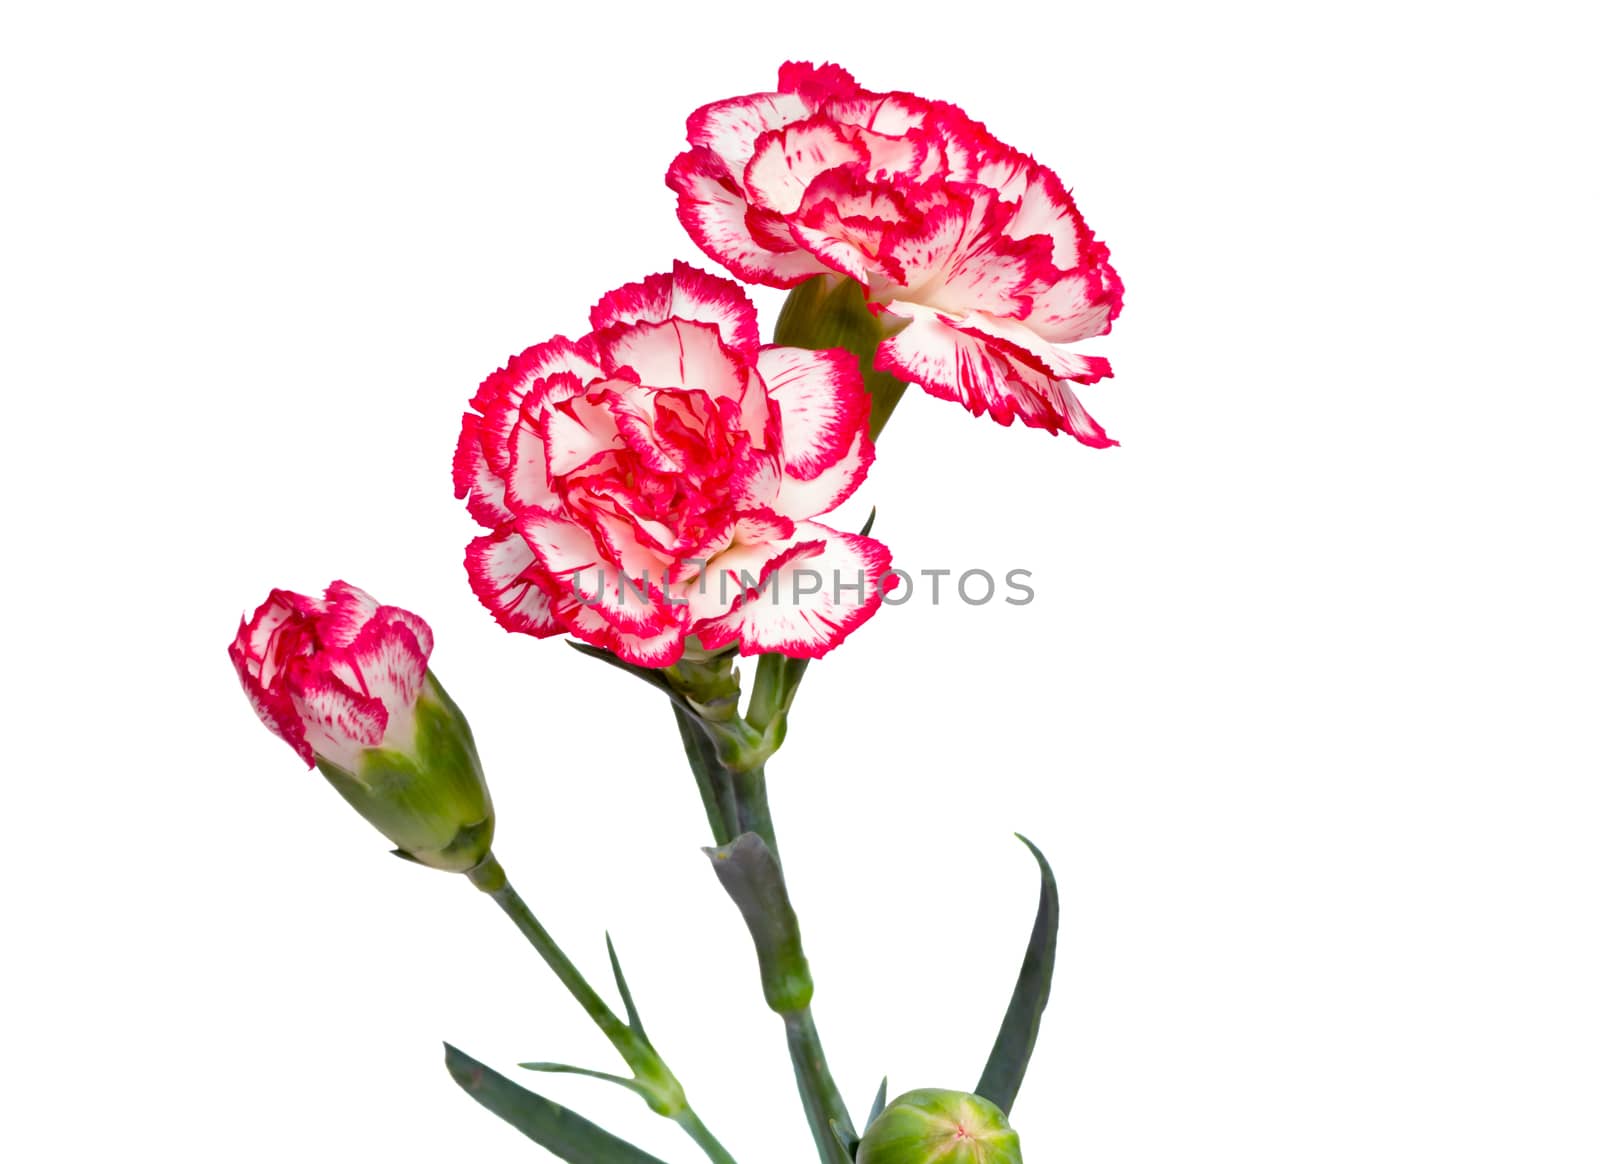 Carnation flowers on a white background. by georgina198